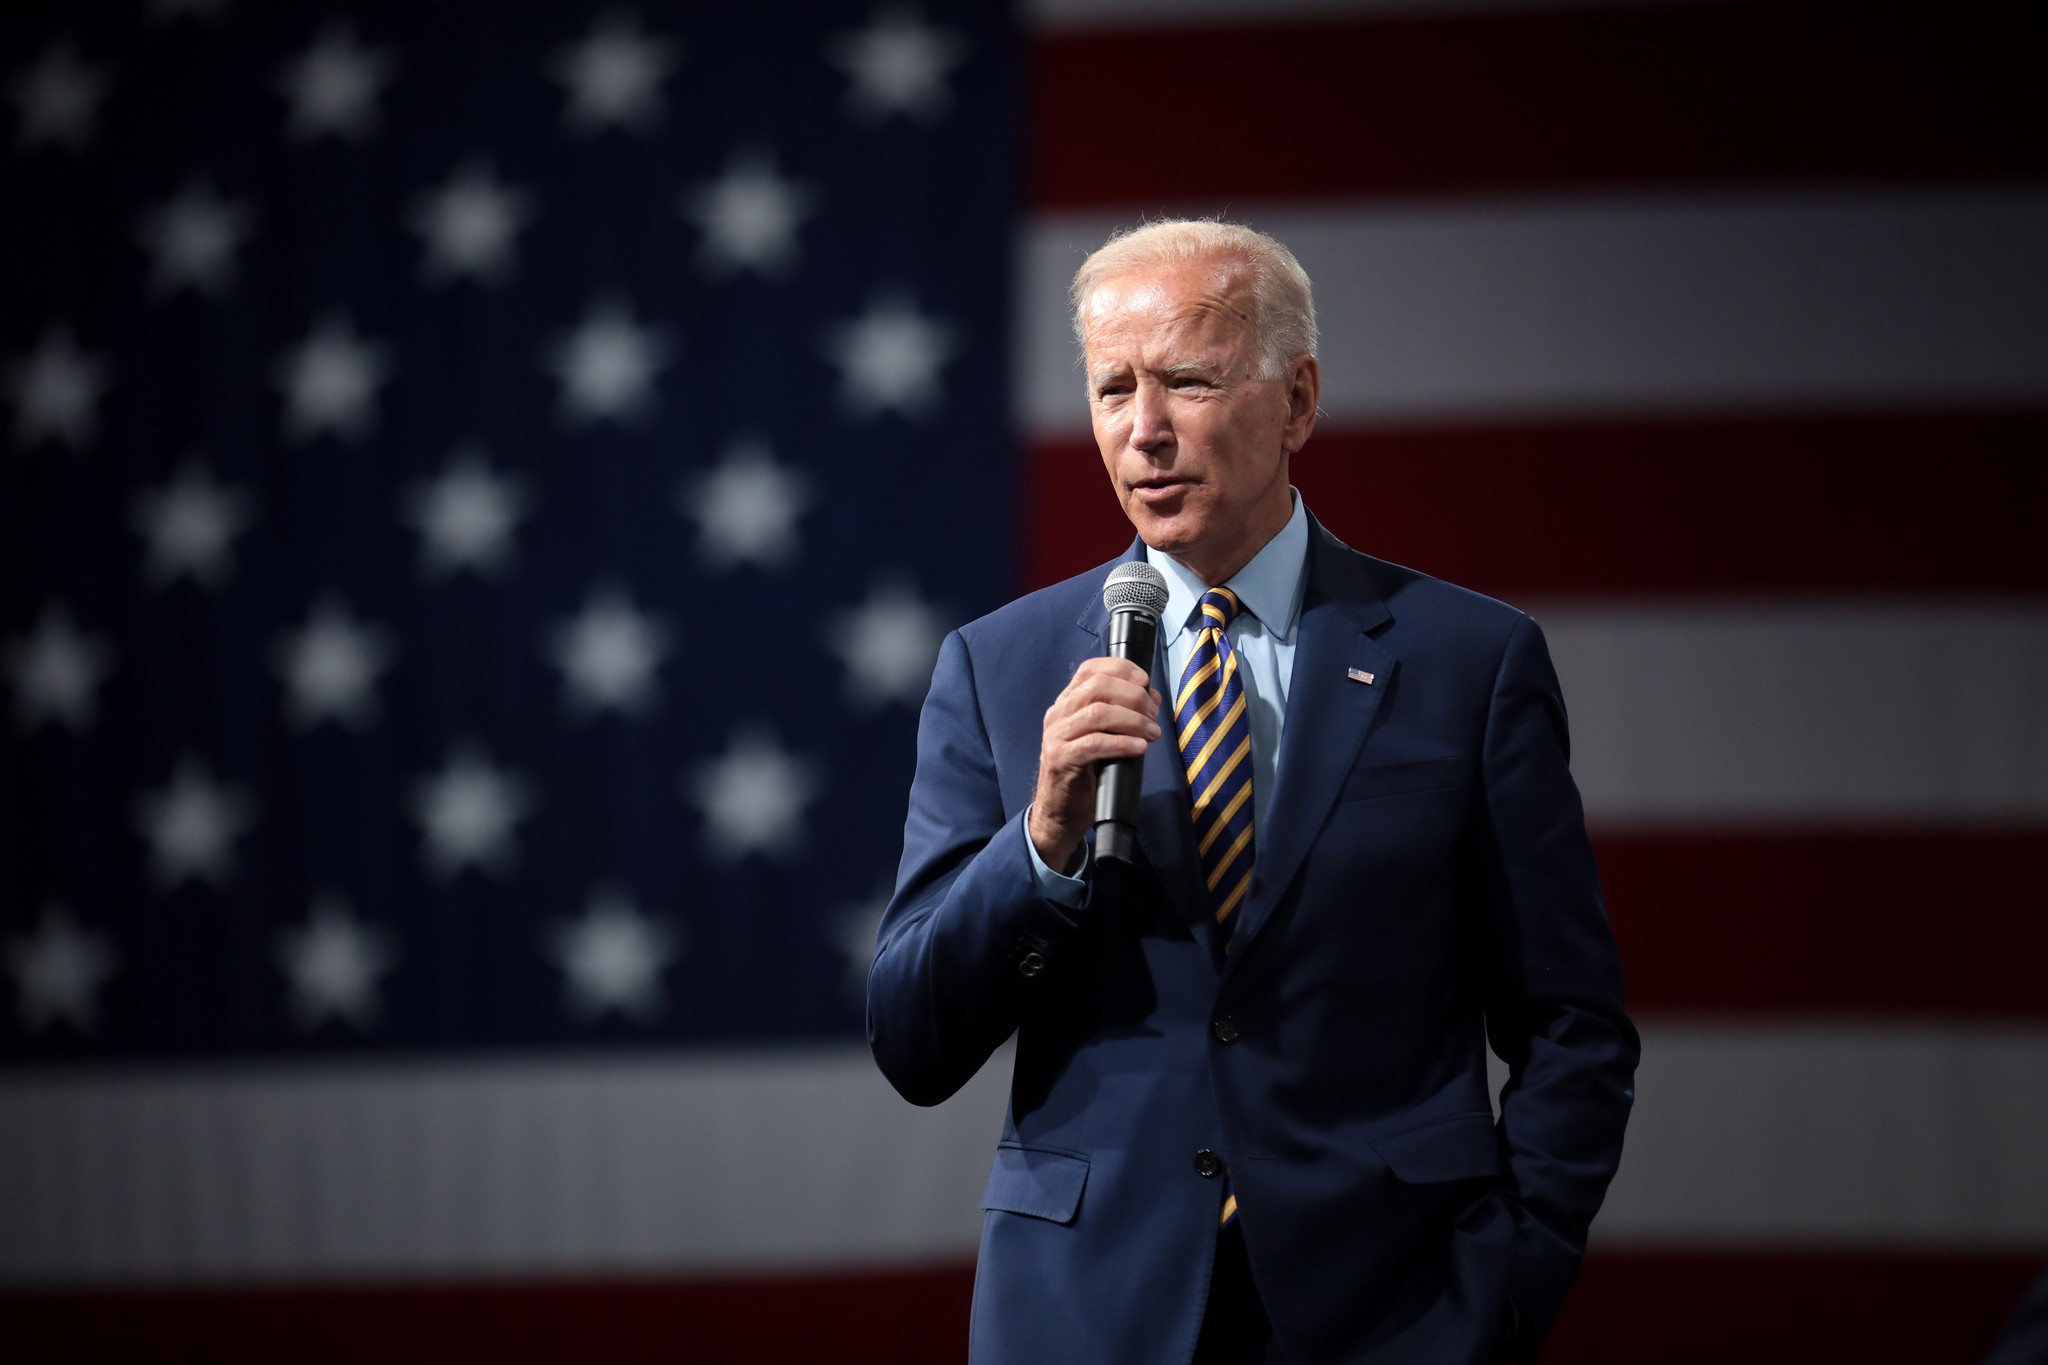 President Biden says tech firms must ensure their AI products are safe